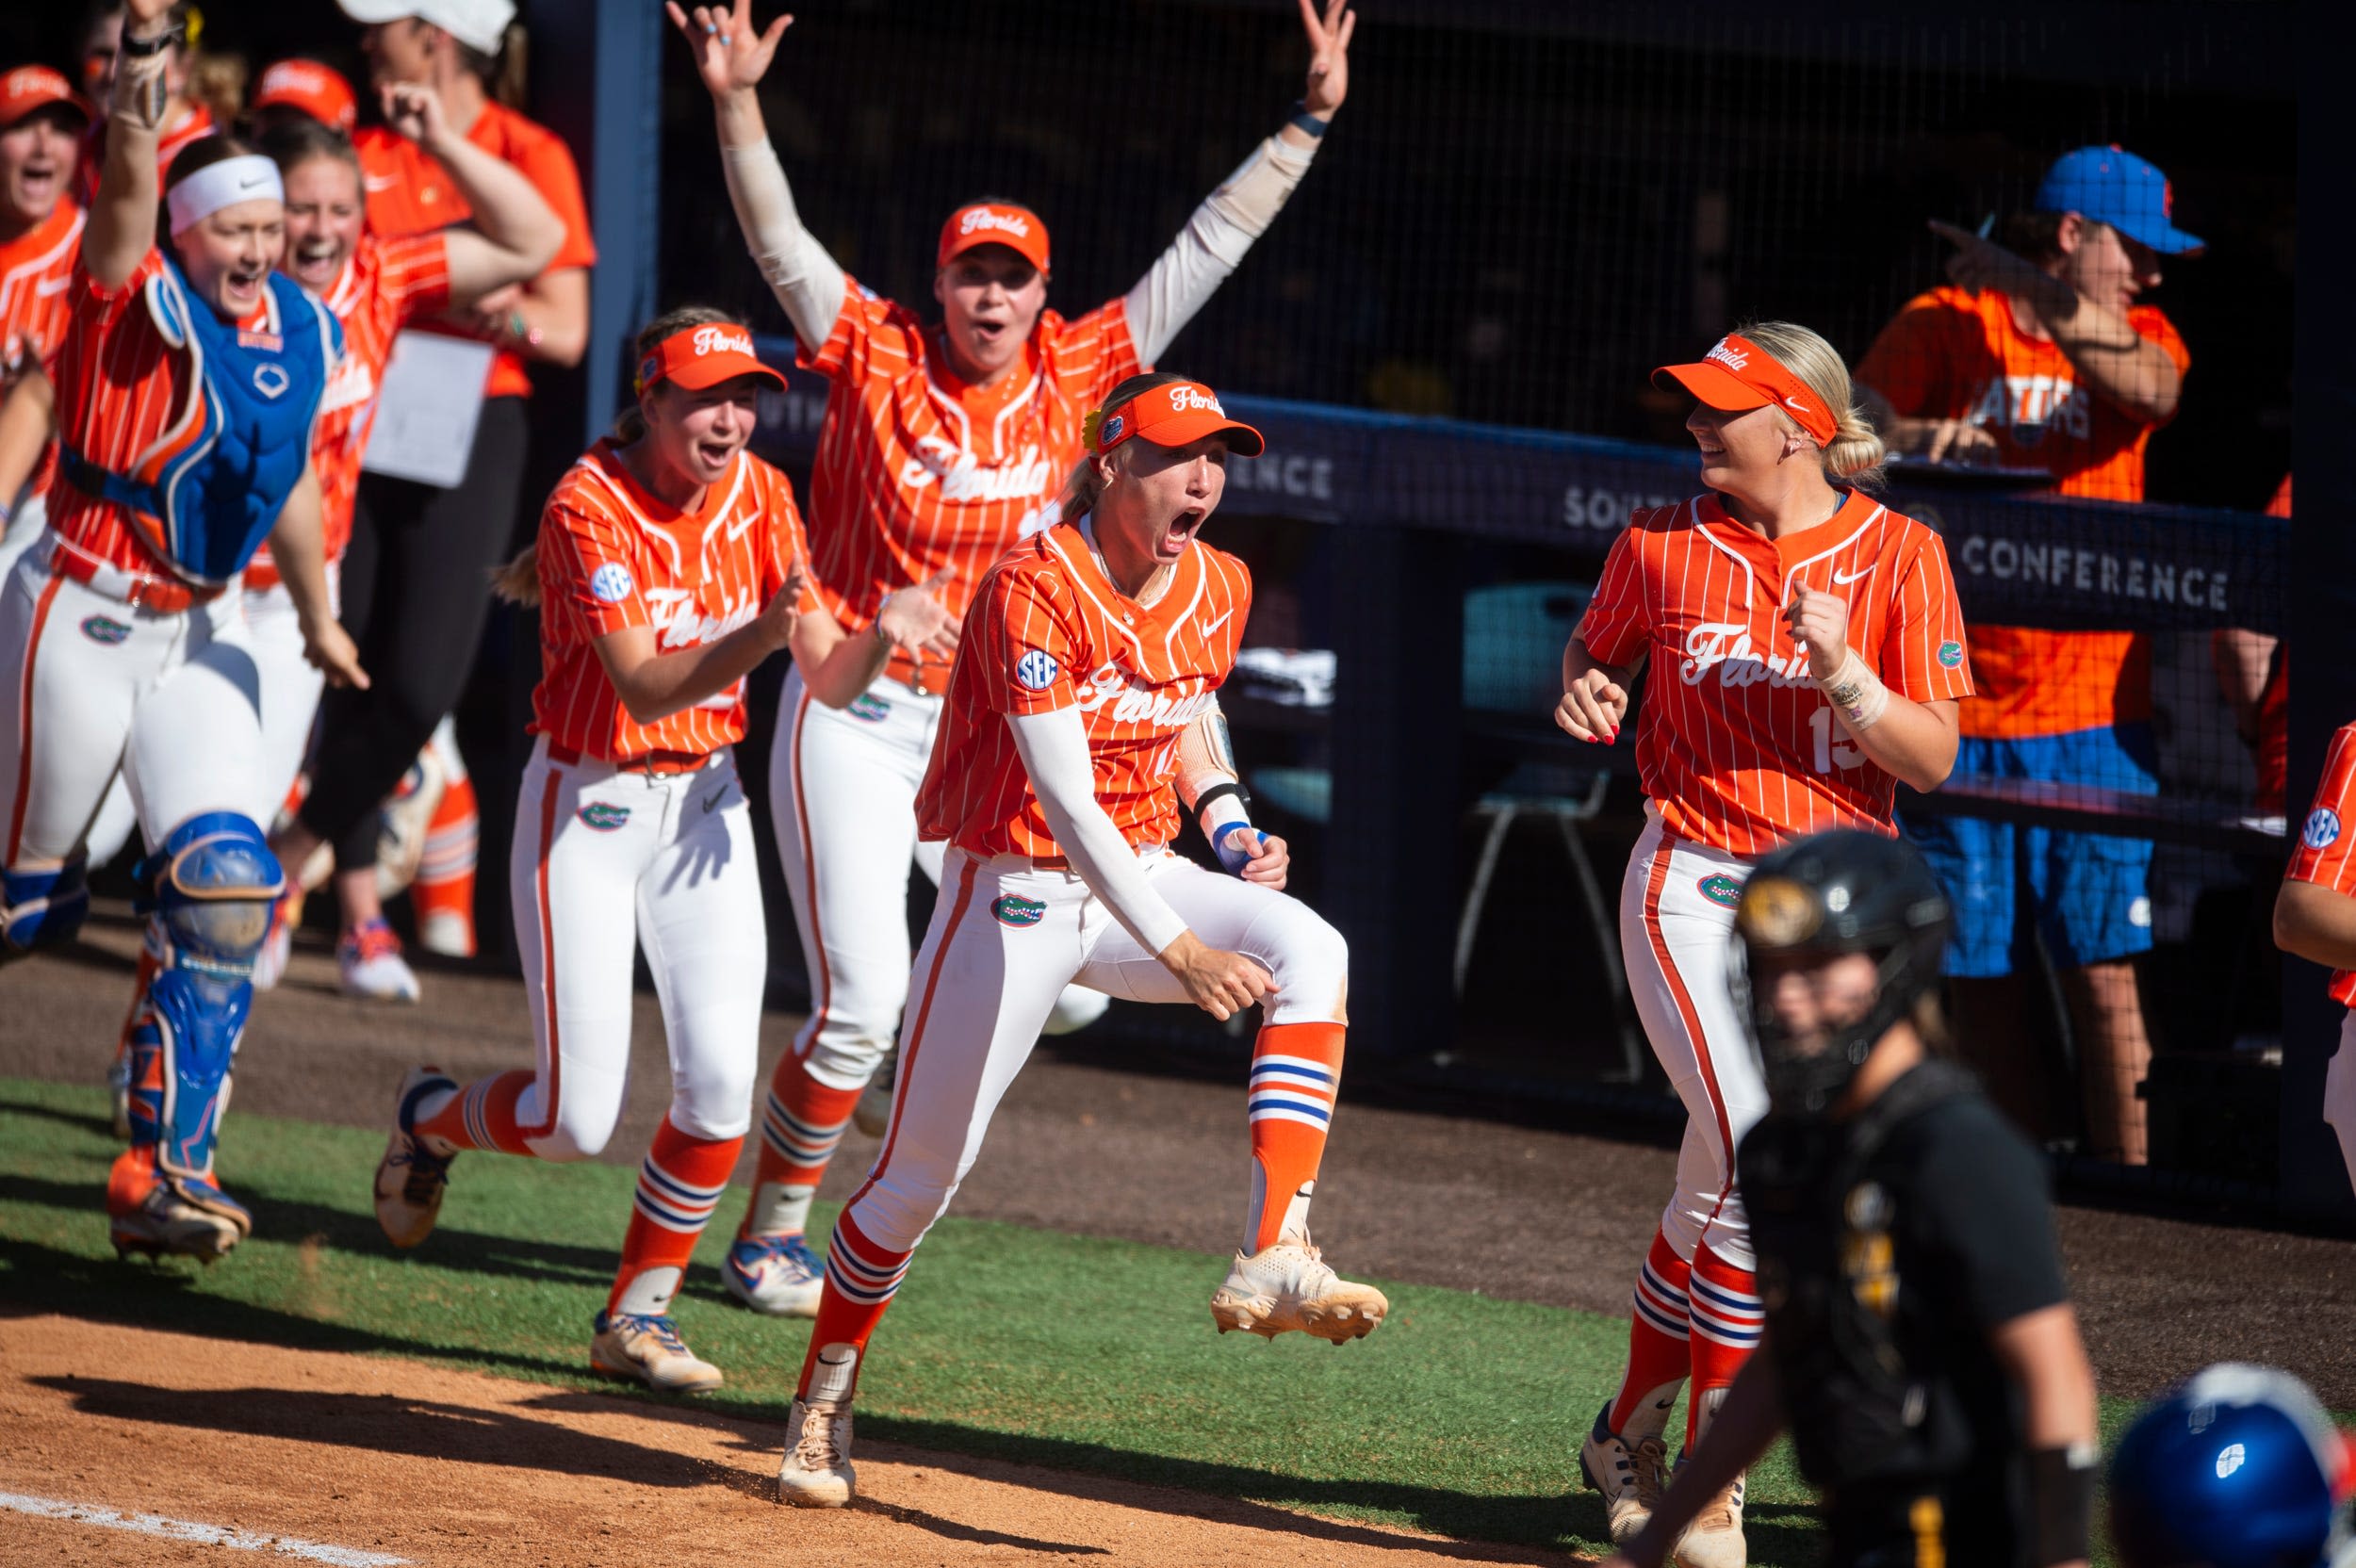 What to know about the Gainesville NCAA softball regional: Schedule, parking, TV